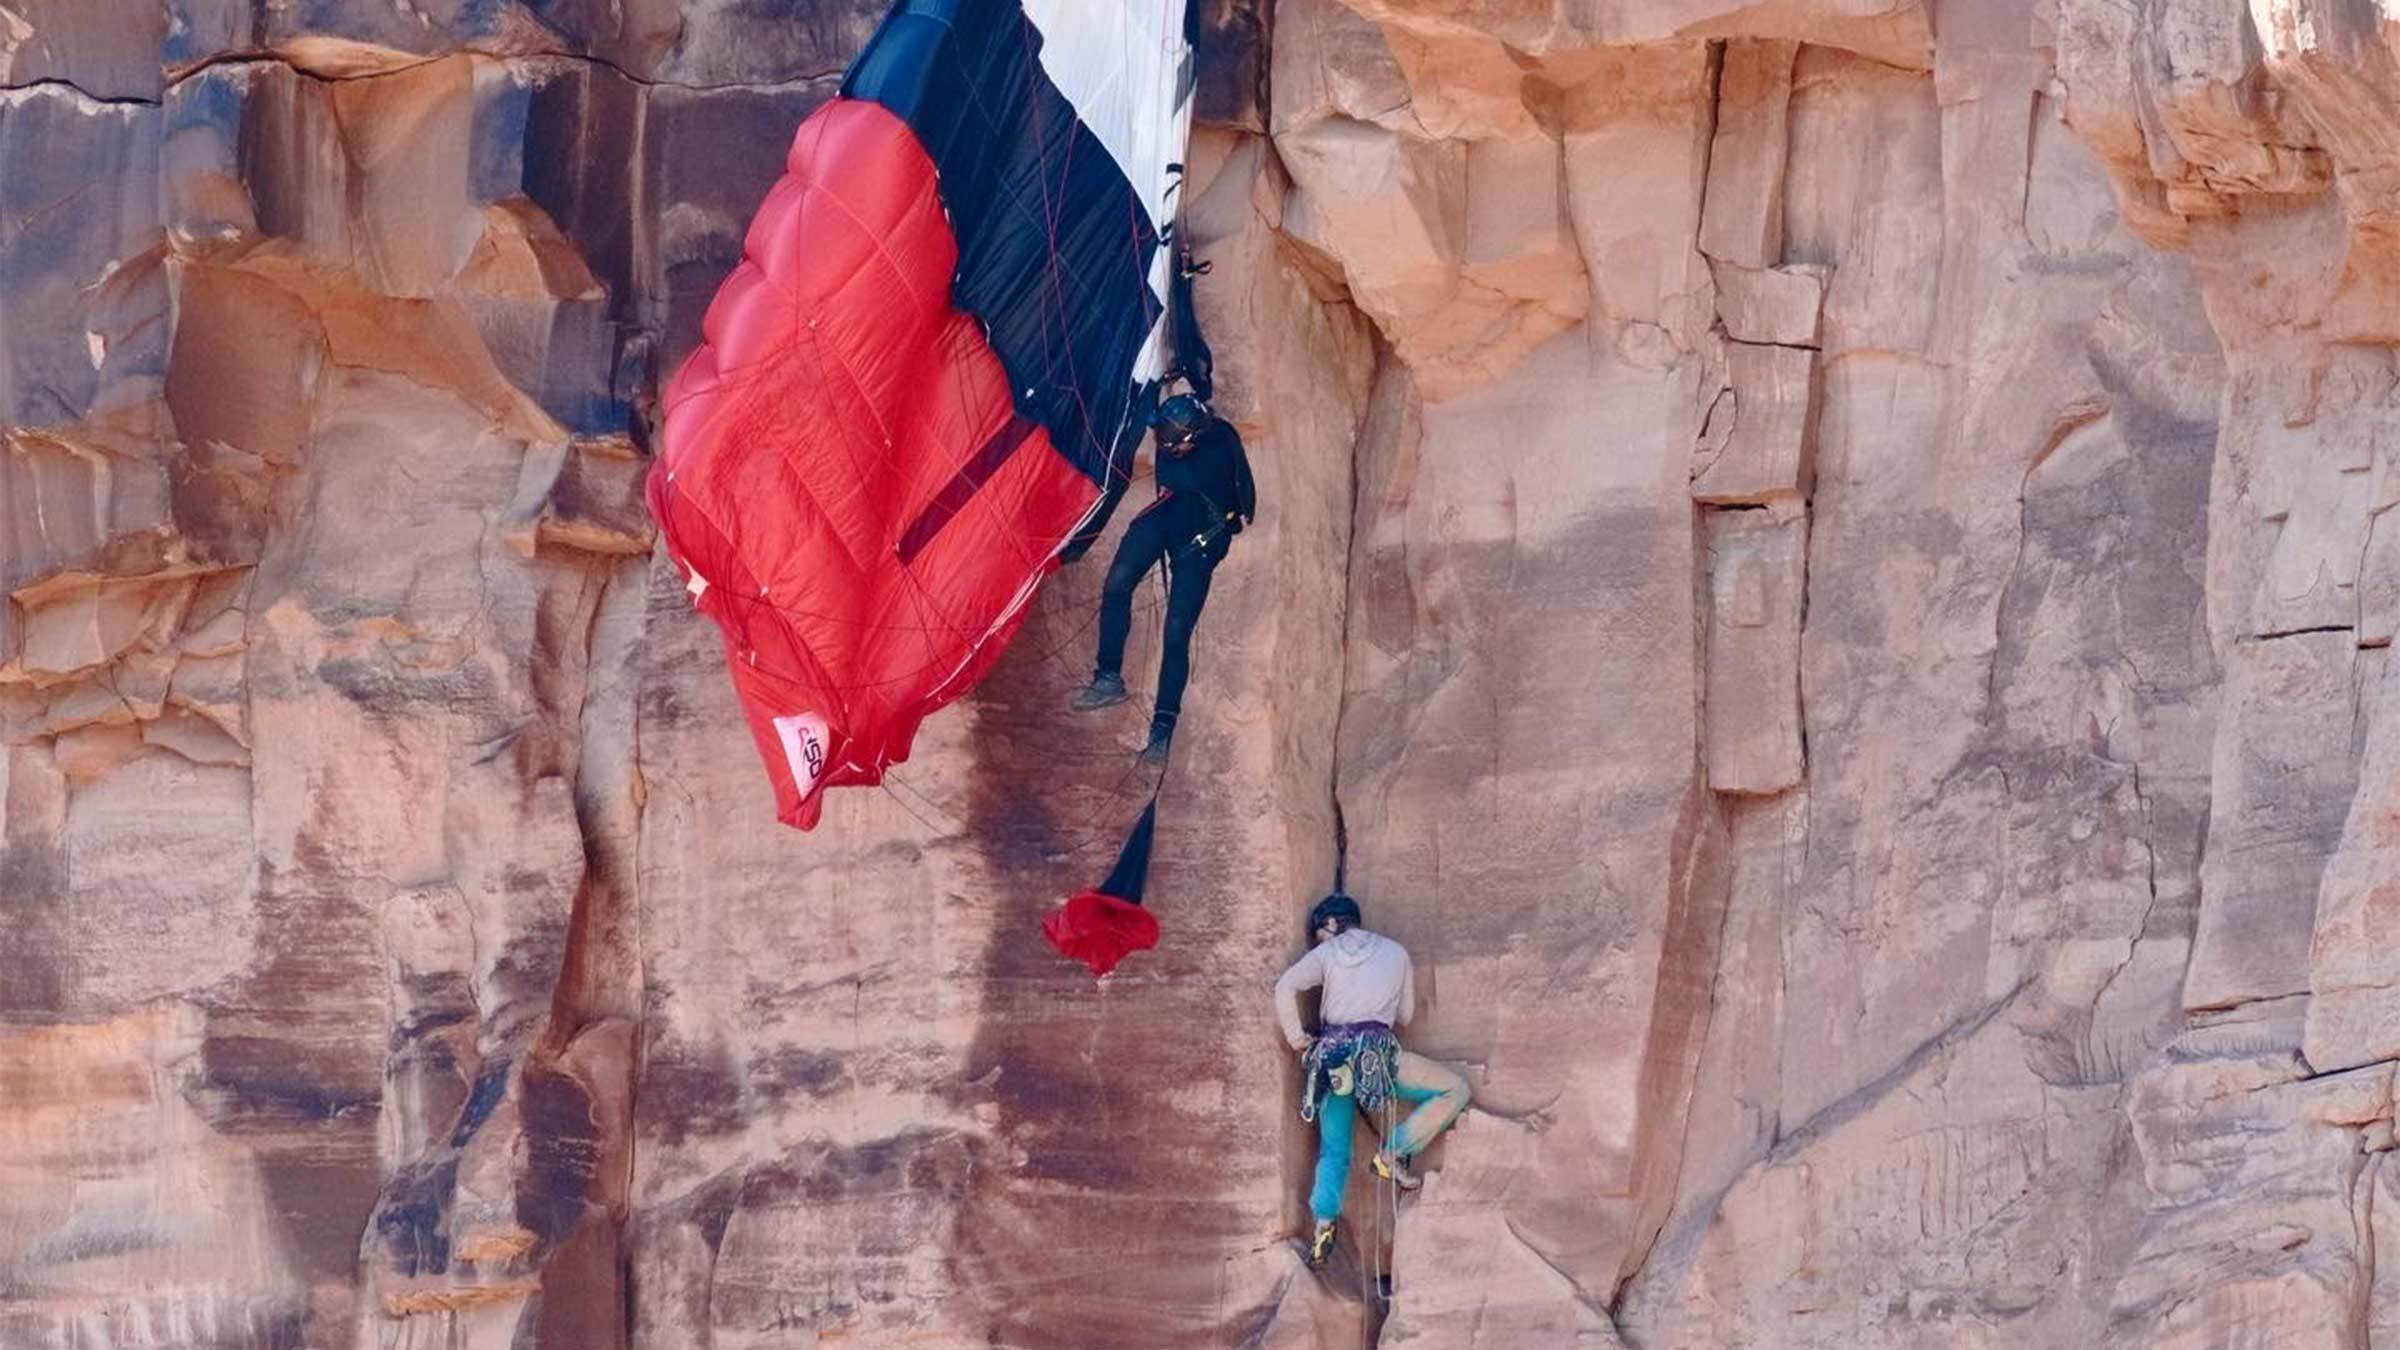 A Bold Rescue on a Moab Cliff - Outside Online